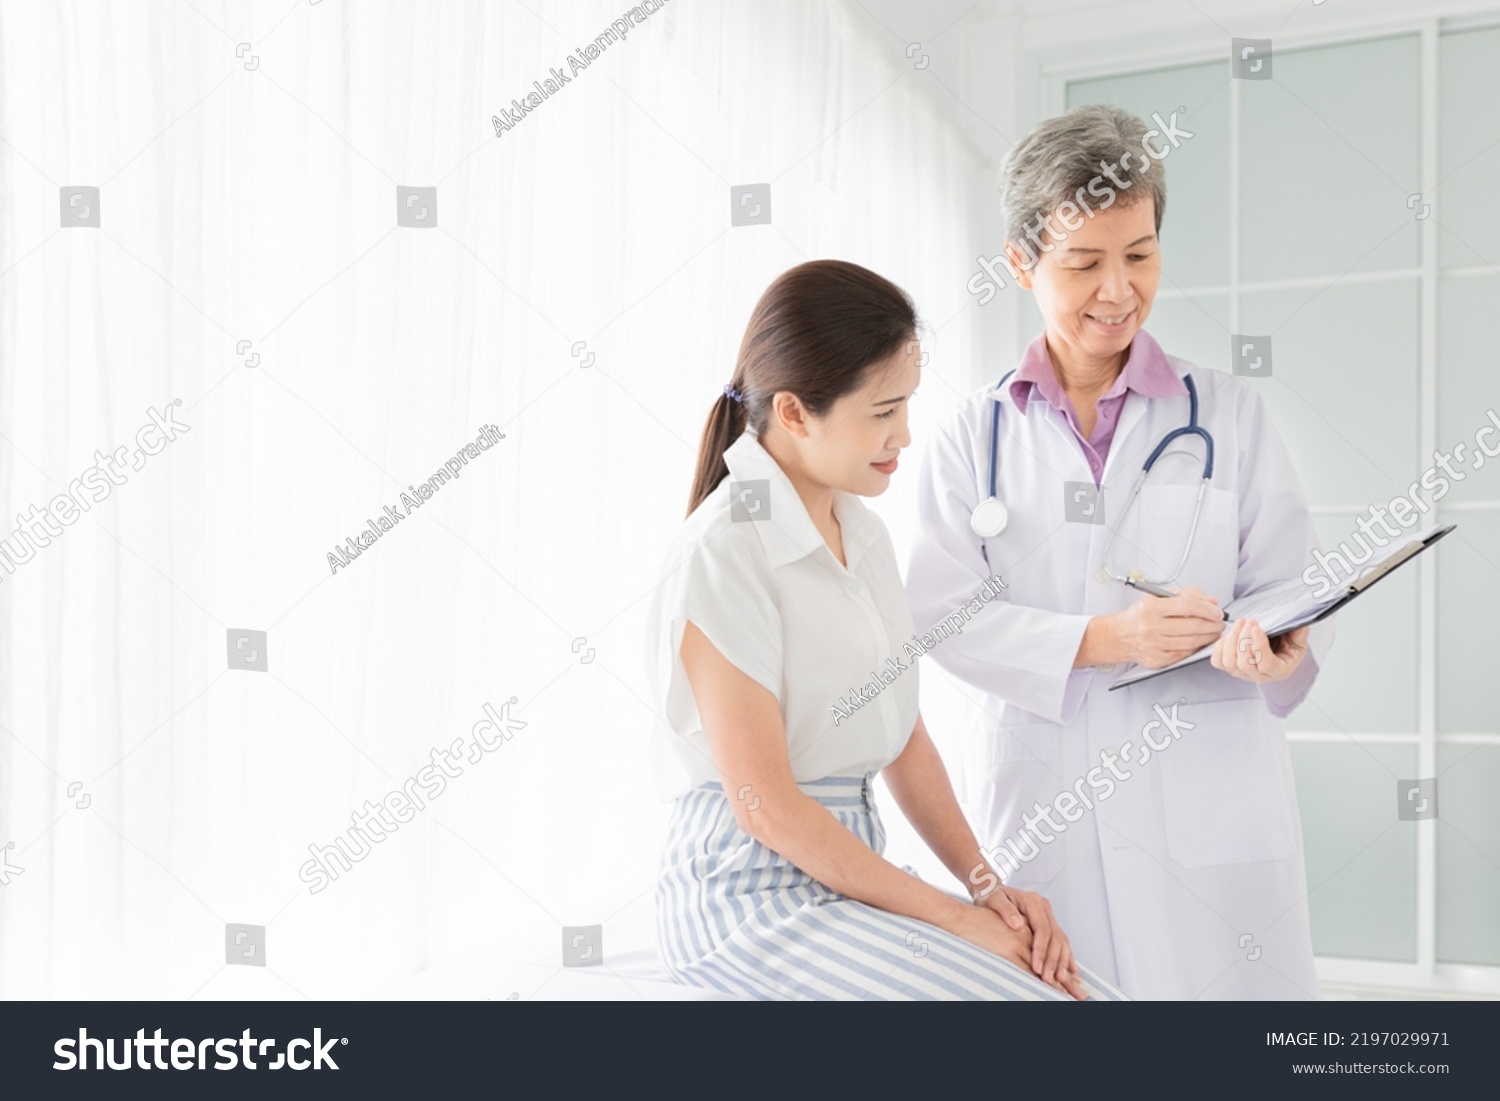 light and blur people, asian female patient talk with doctor in hospital,  doctor screening and write patient information on patient chart, healthcare promotion
 #2197029971